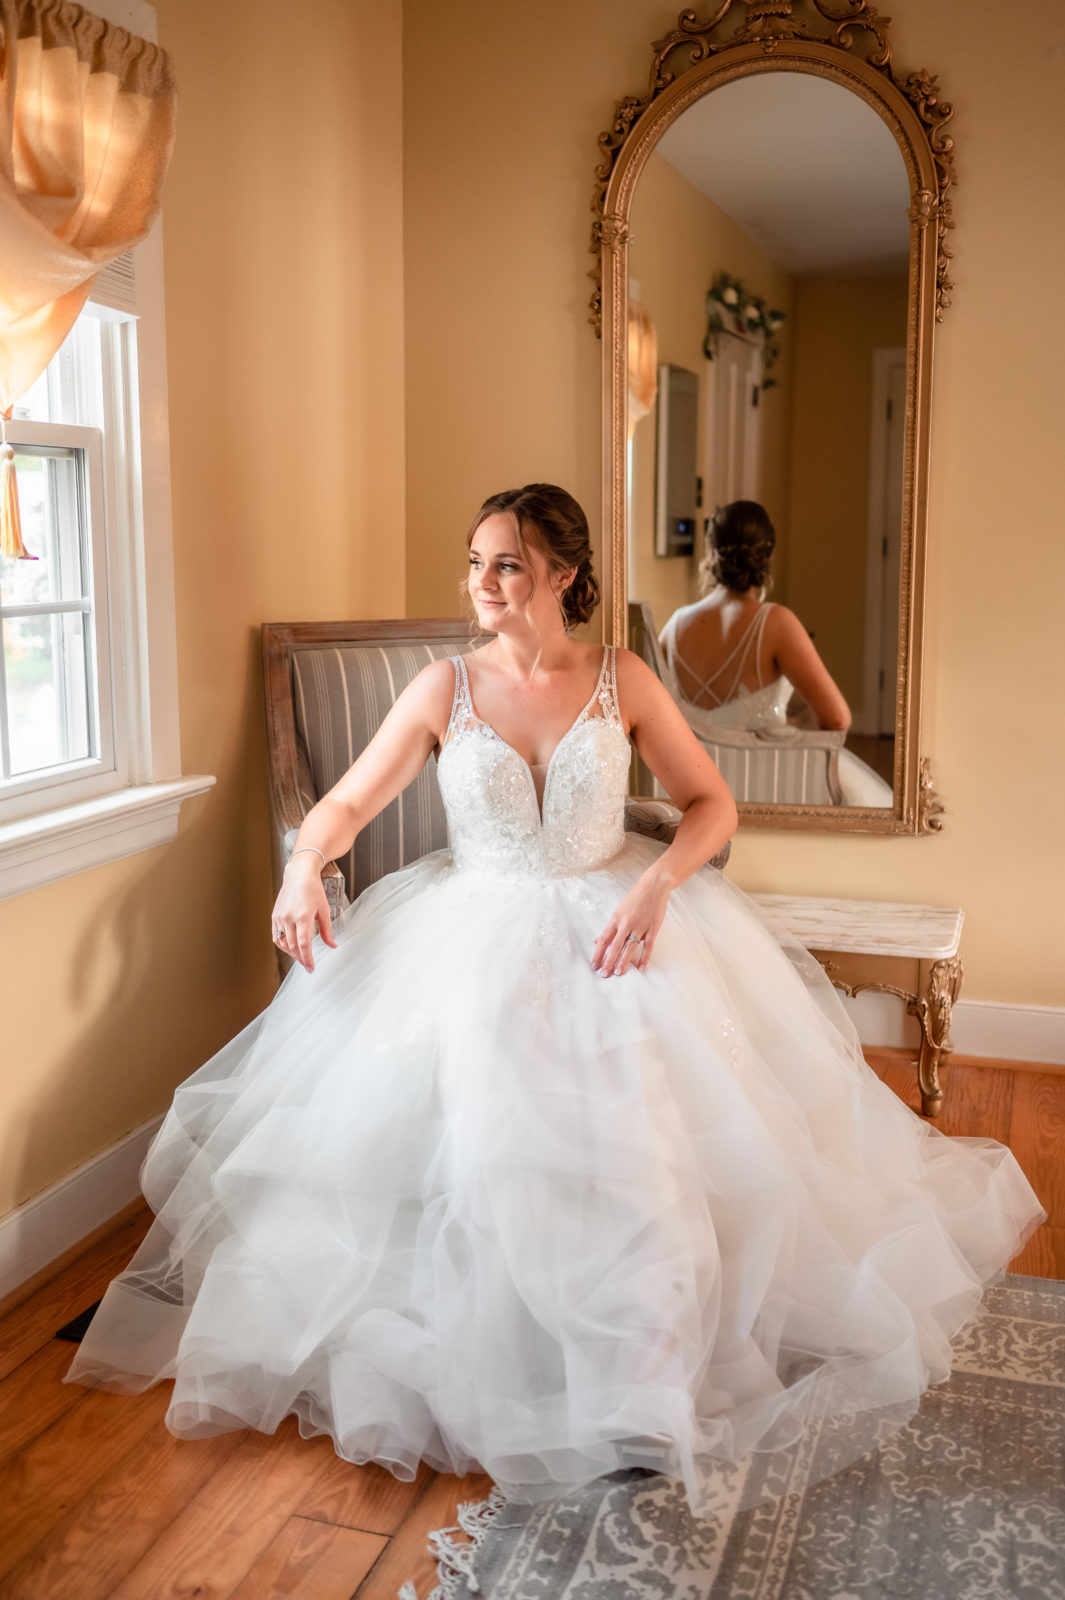 A hot of Lynne's beautiful wedding gown with her sitting on chair